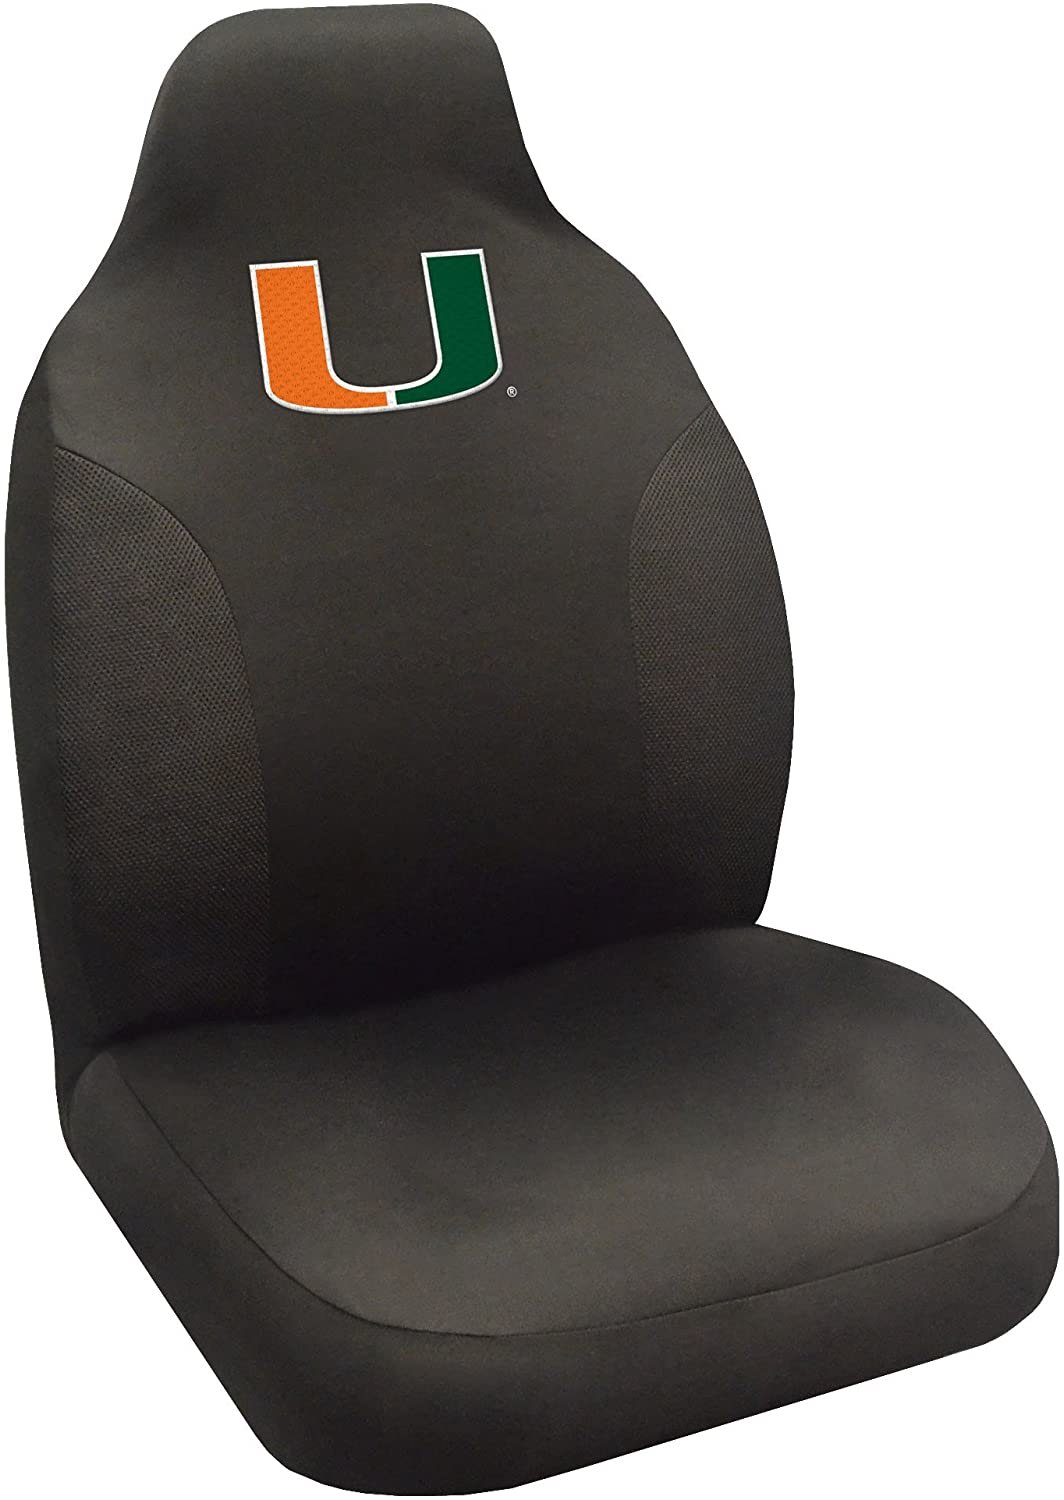 FANMATS 15080 NCAA University of Miami Hurricanes Polyester Seat Cover